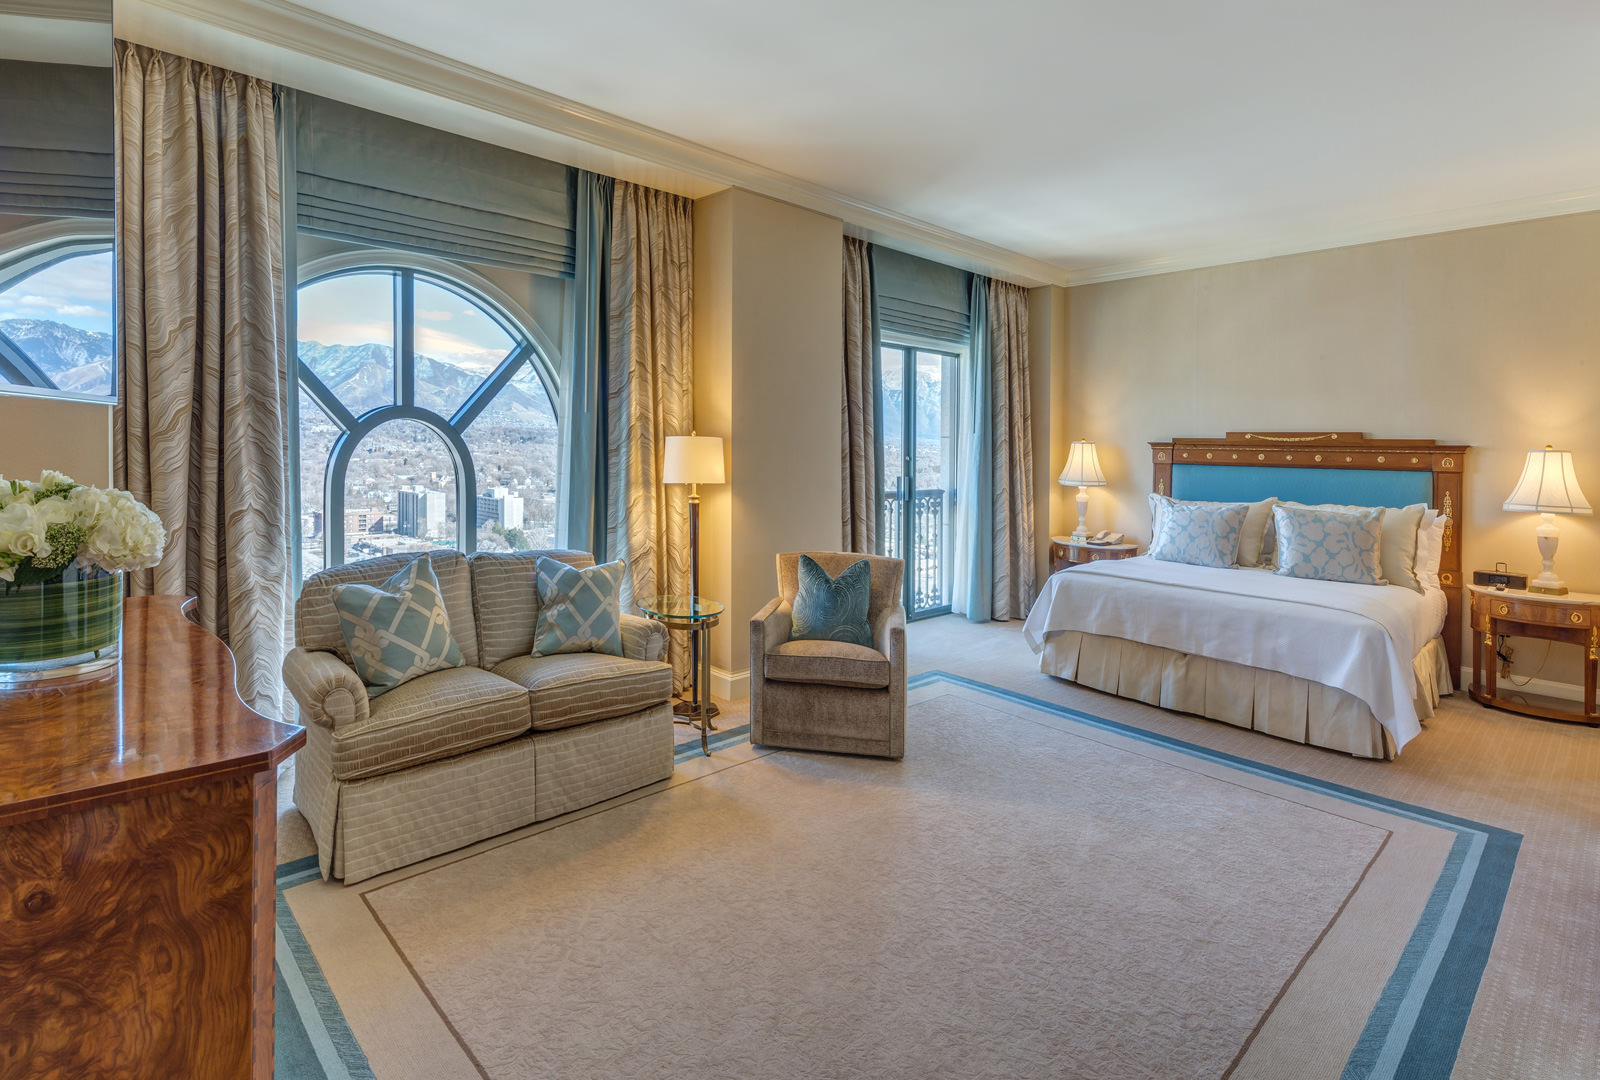 Grand America Hotel Presidential Suites bedroom with arch windows and a king size bed